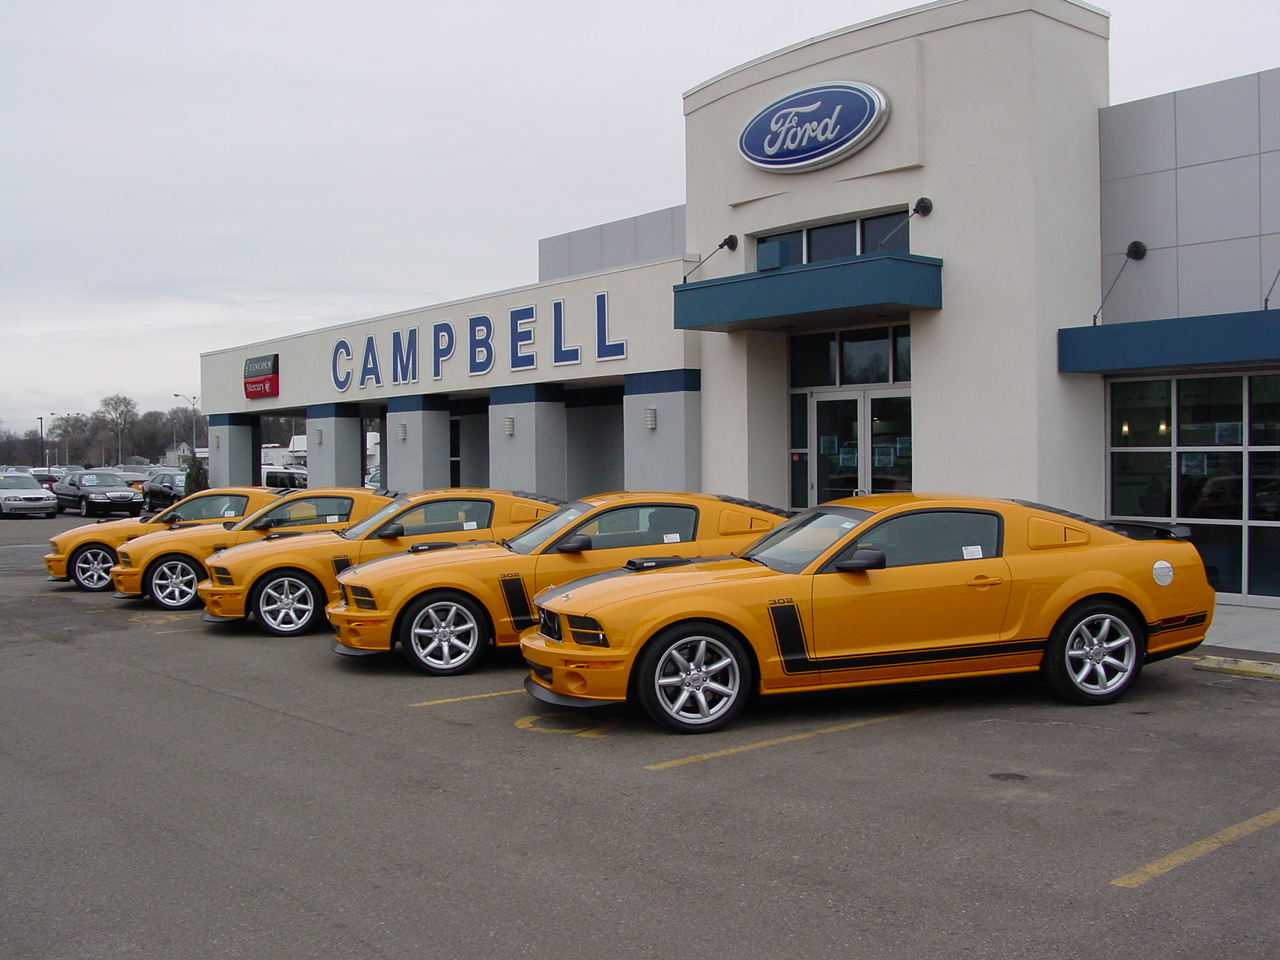 Campbell ford mi niles #4